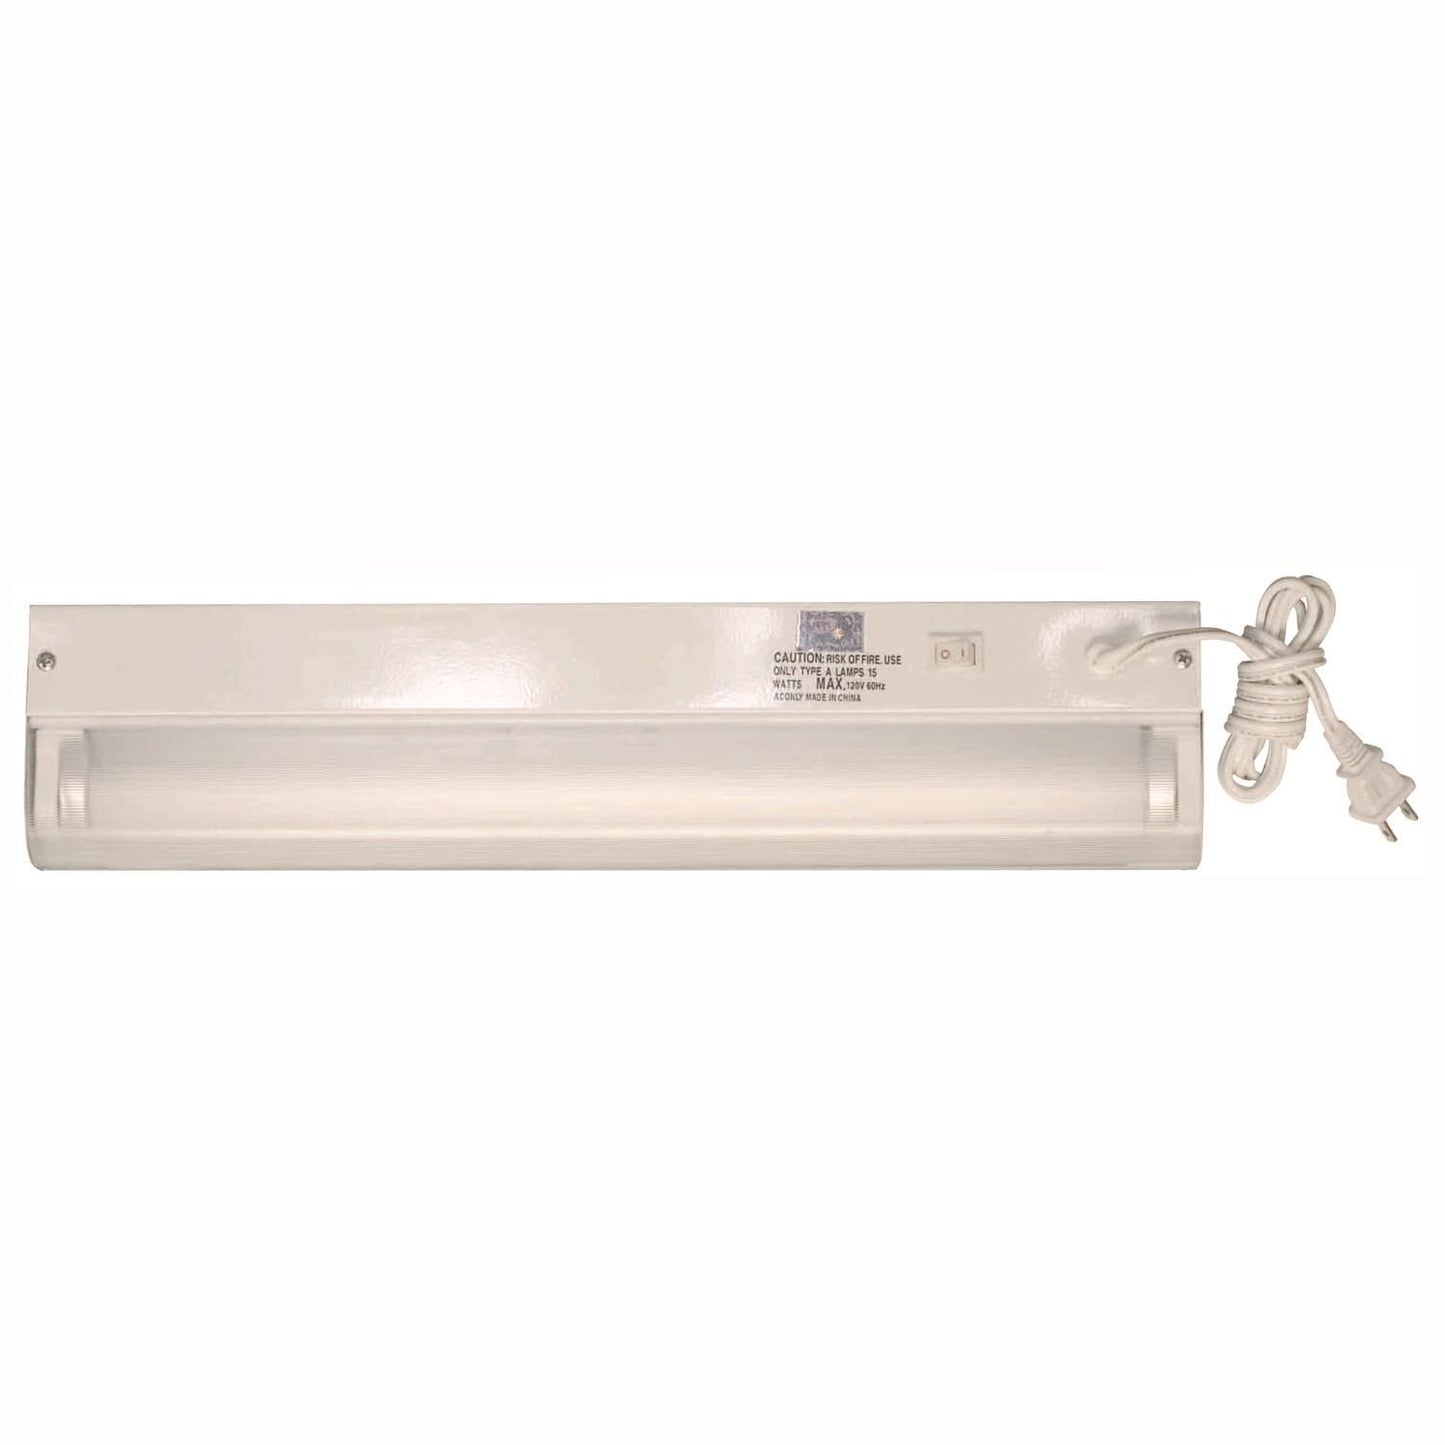 Sunlite 18" Fluorescent Under Cabinet Fixture with Plug, White Finish, Ribbed Frosted Lens